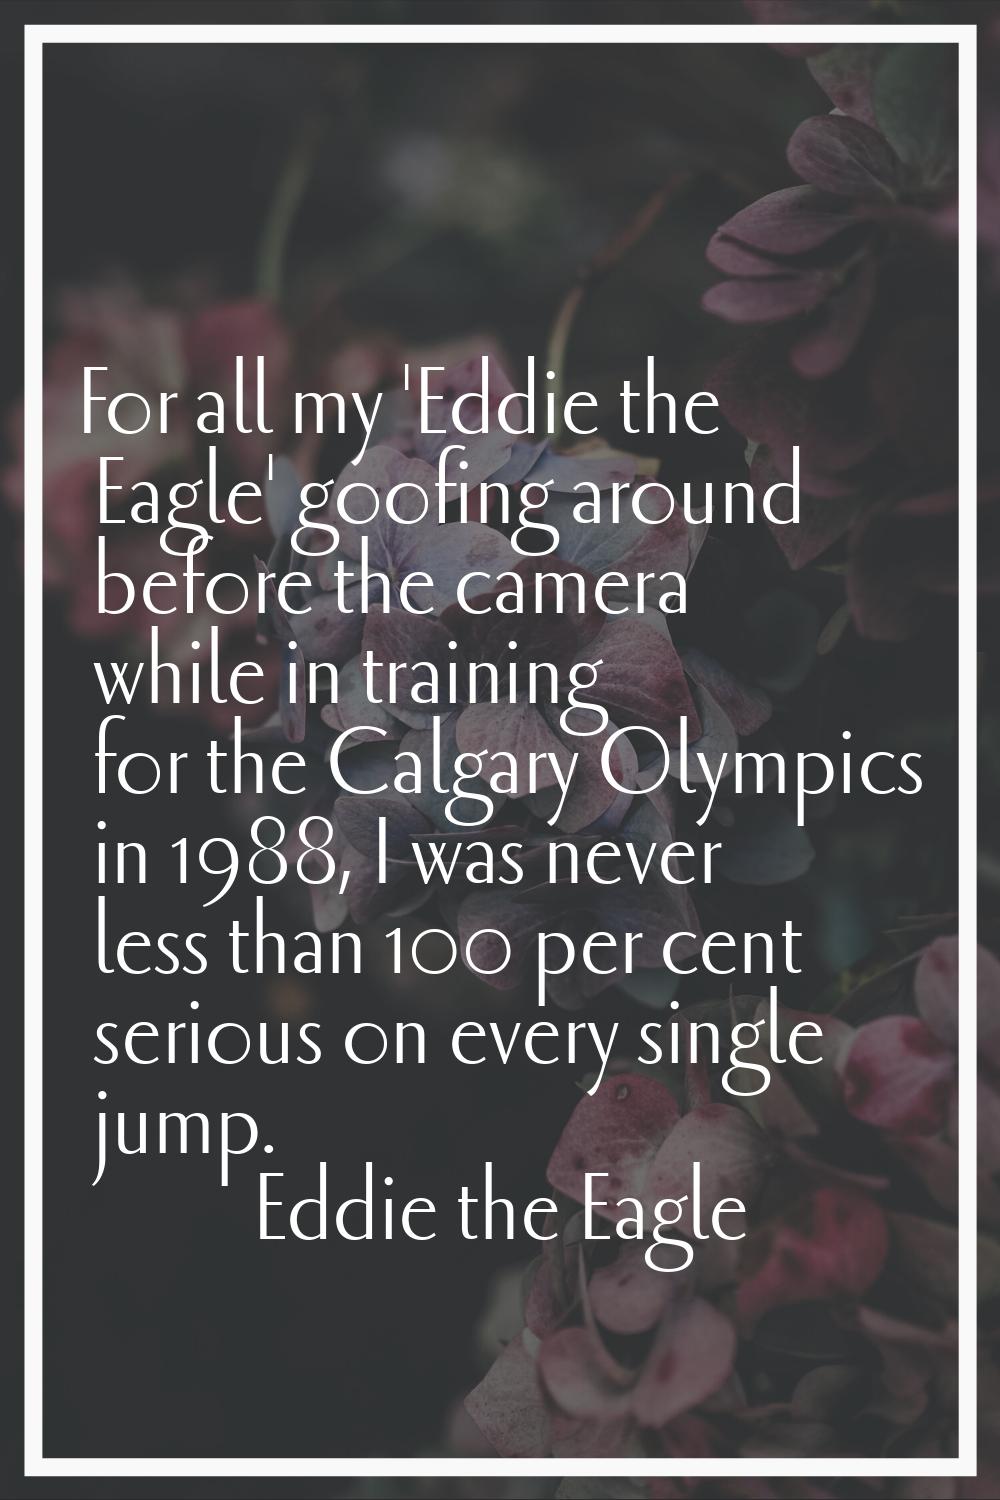 For all my 'Eddie the Eagle' goofing around before the camera while in training for the Calgary Oly